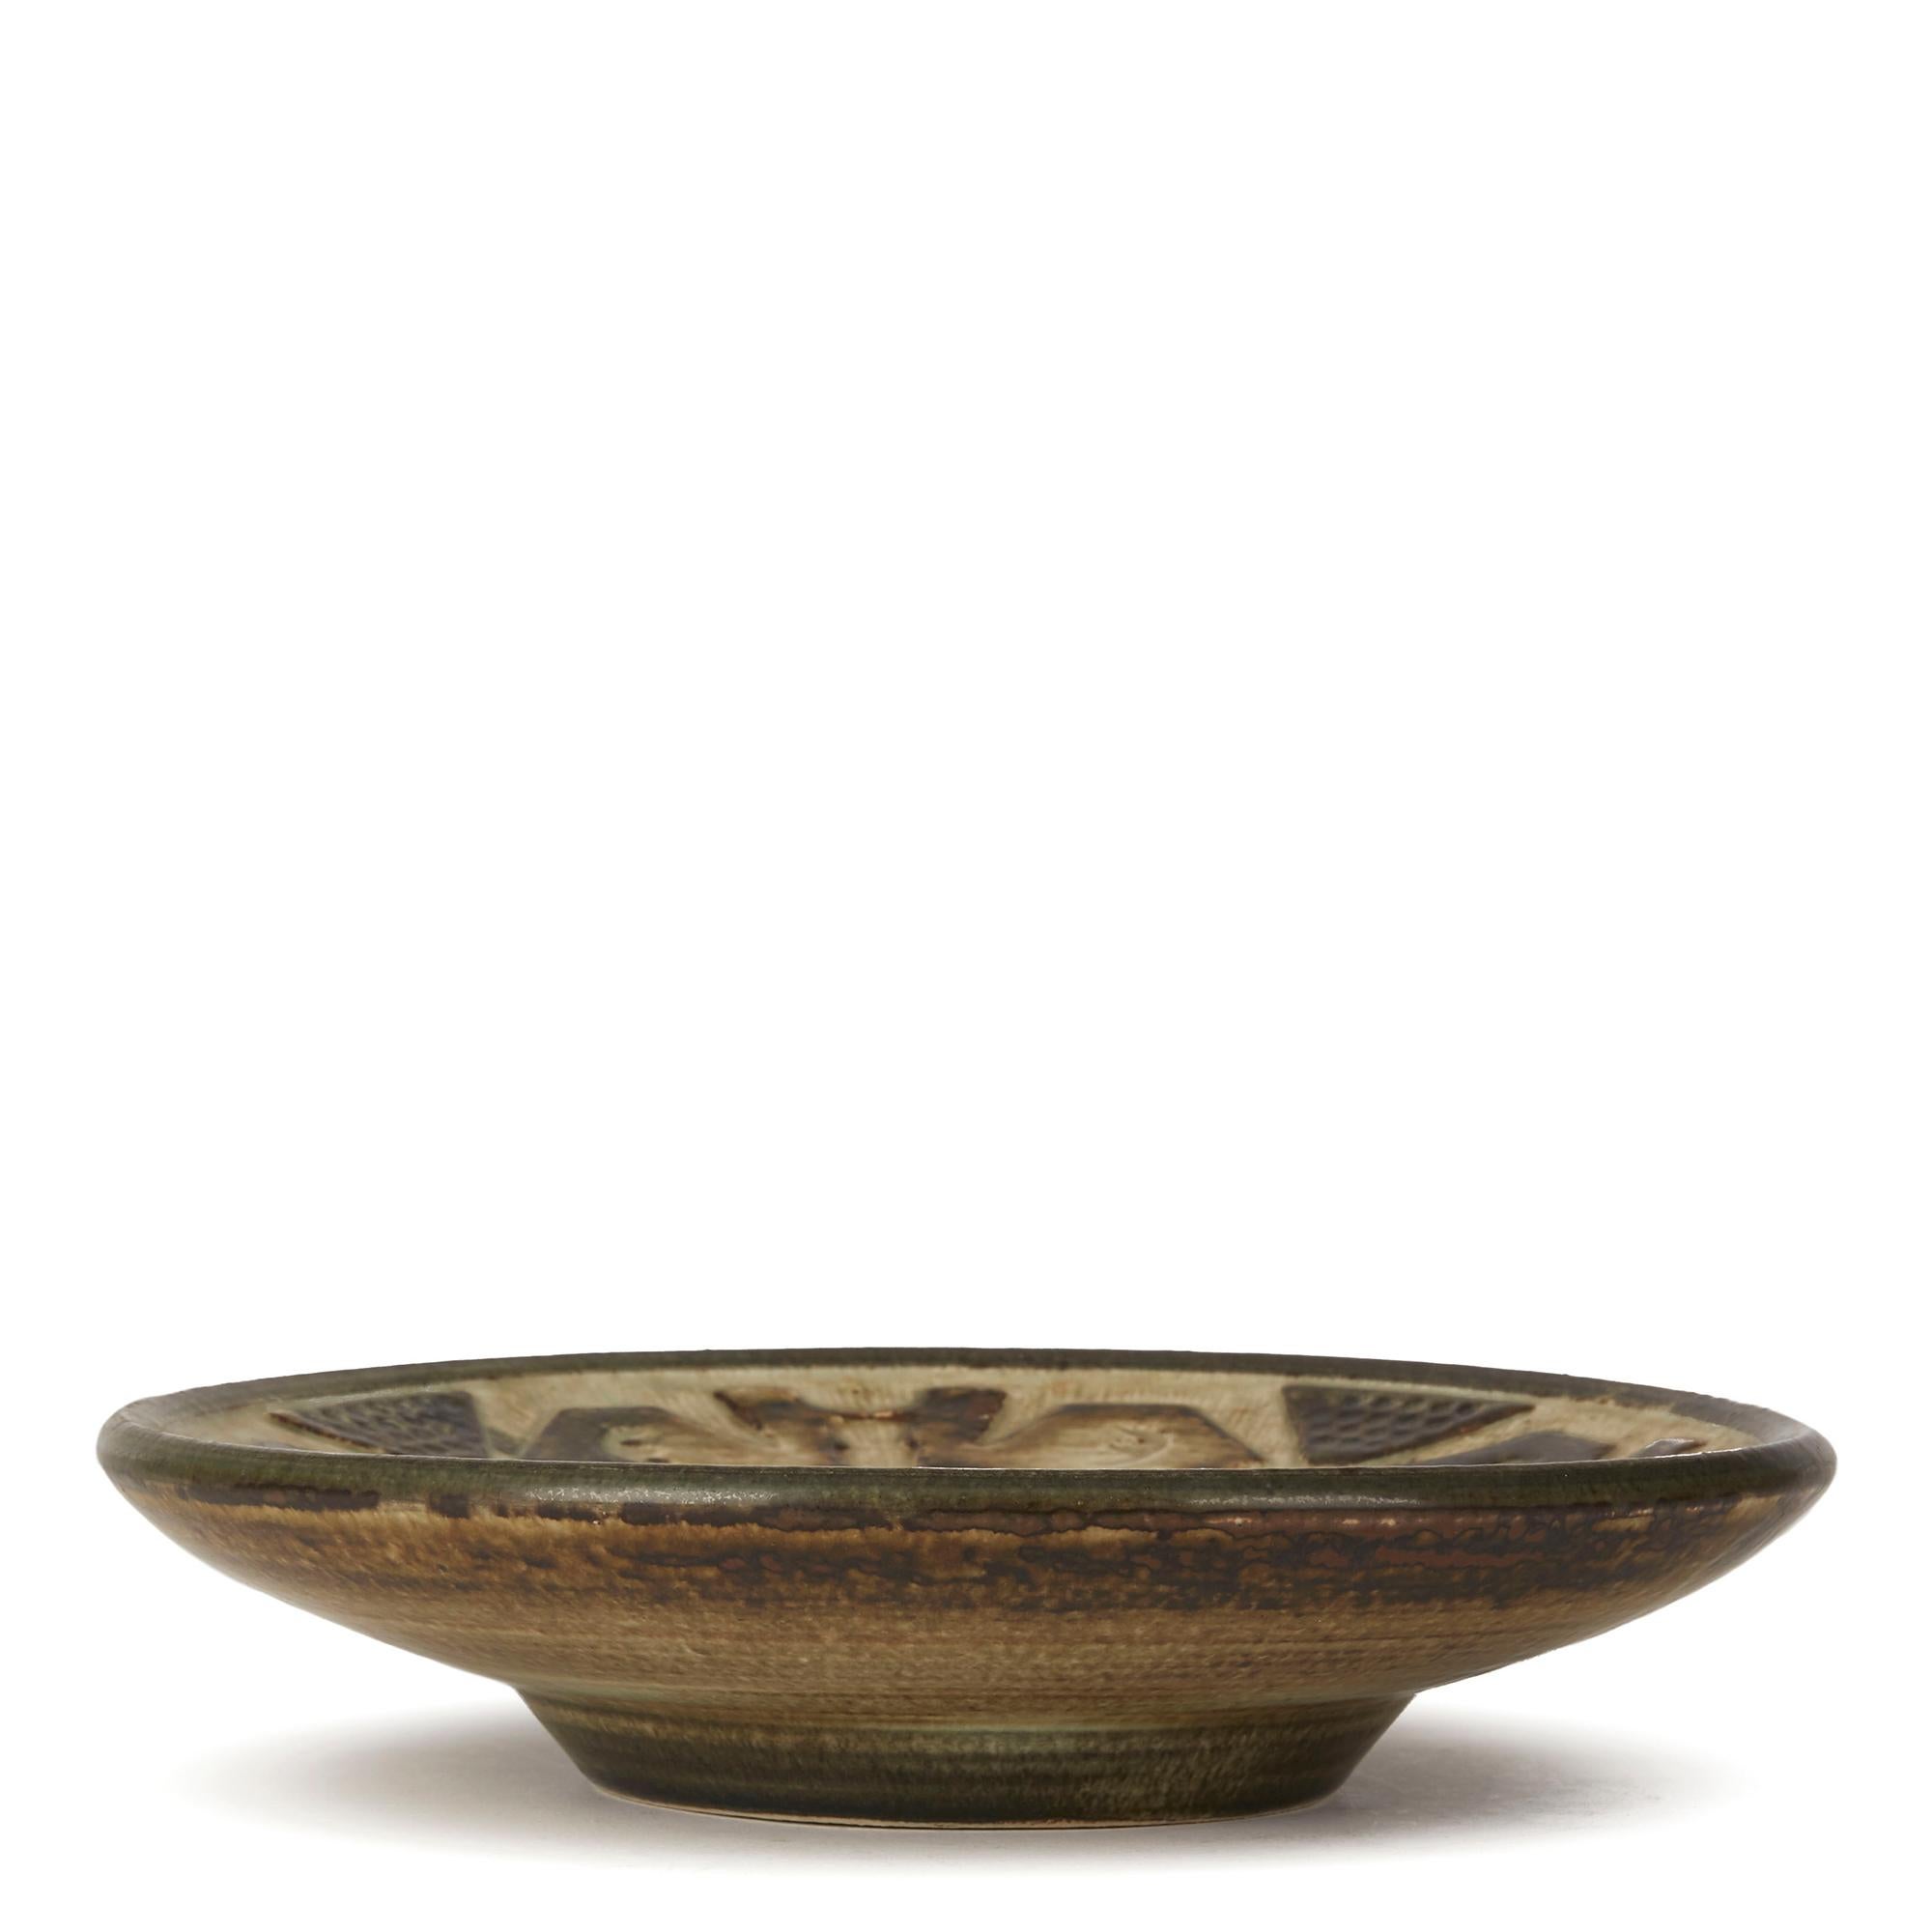 Stunning and heavily made midcentury Danish art pottery bowl designed by Jørgen Morgensen for Royal Copenhagen. Jørgen Morgensen is considered one of the most important potters and sculptors of the 20th century and this very stylish bowl has a